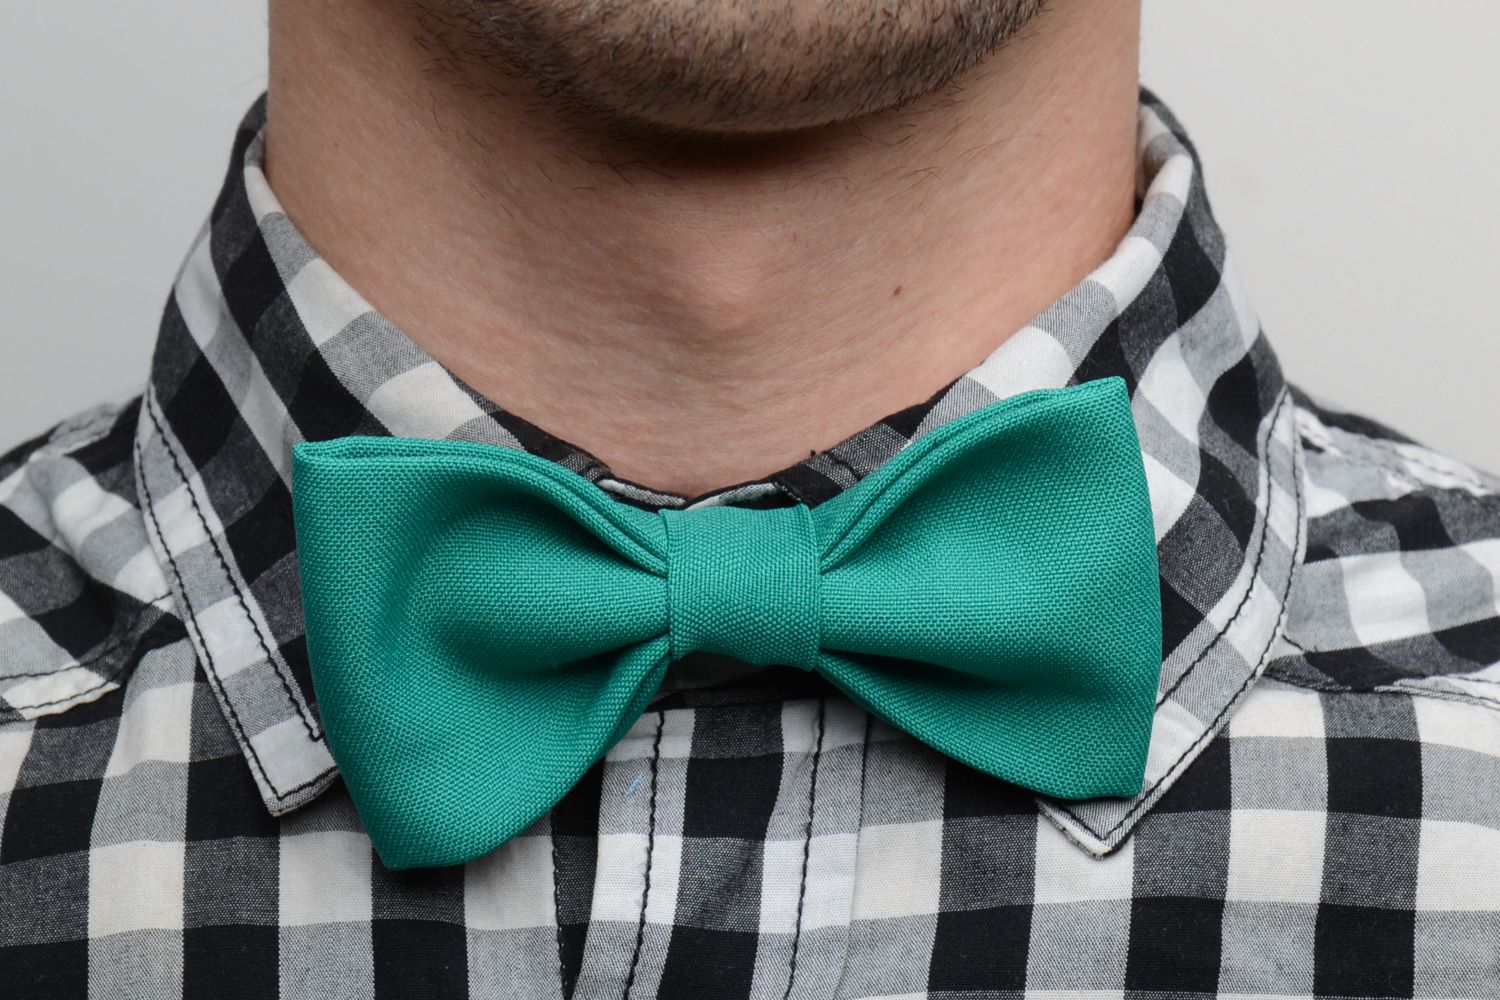 Handmade stylish bow tie sewn of costume fabric of turquoise color for men photo 1